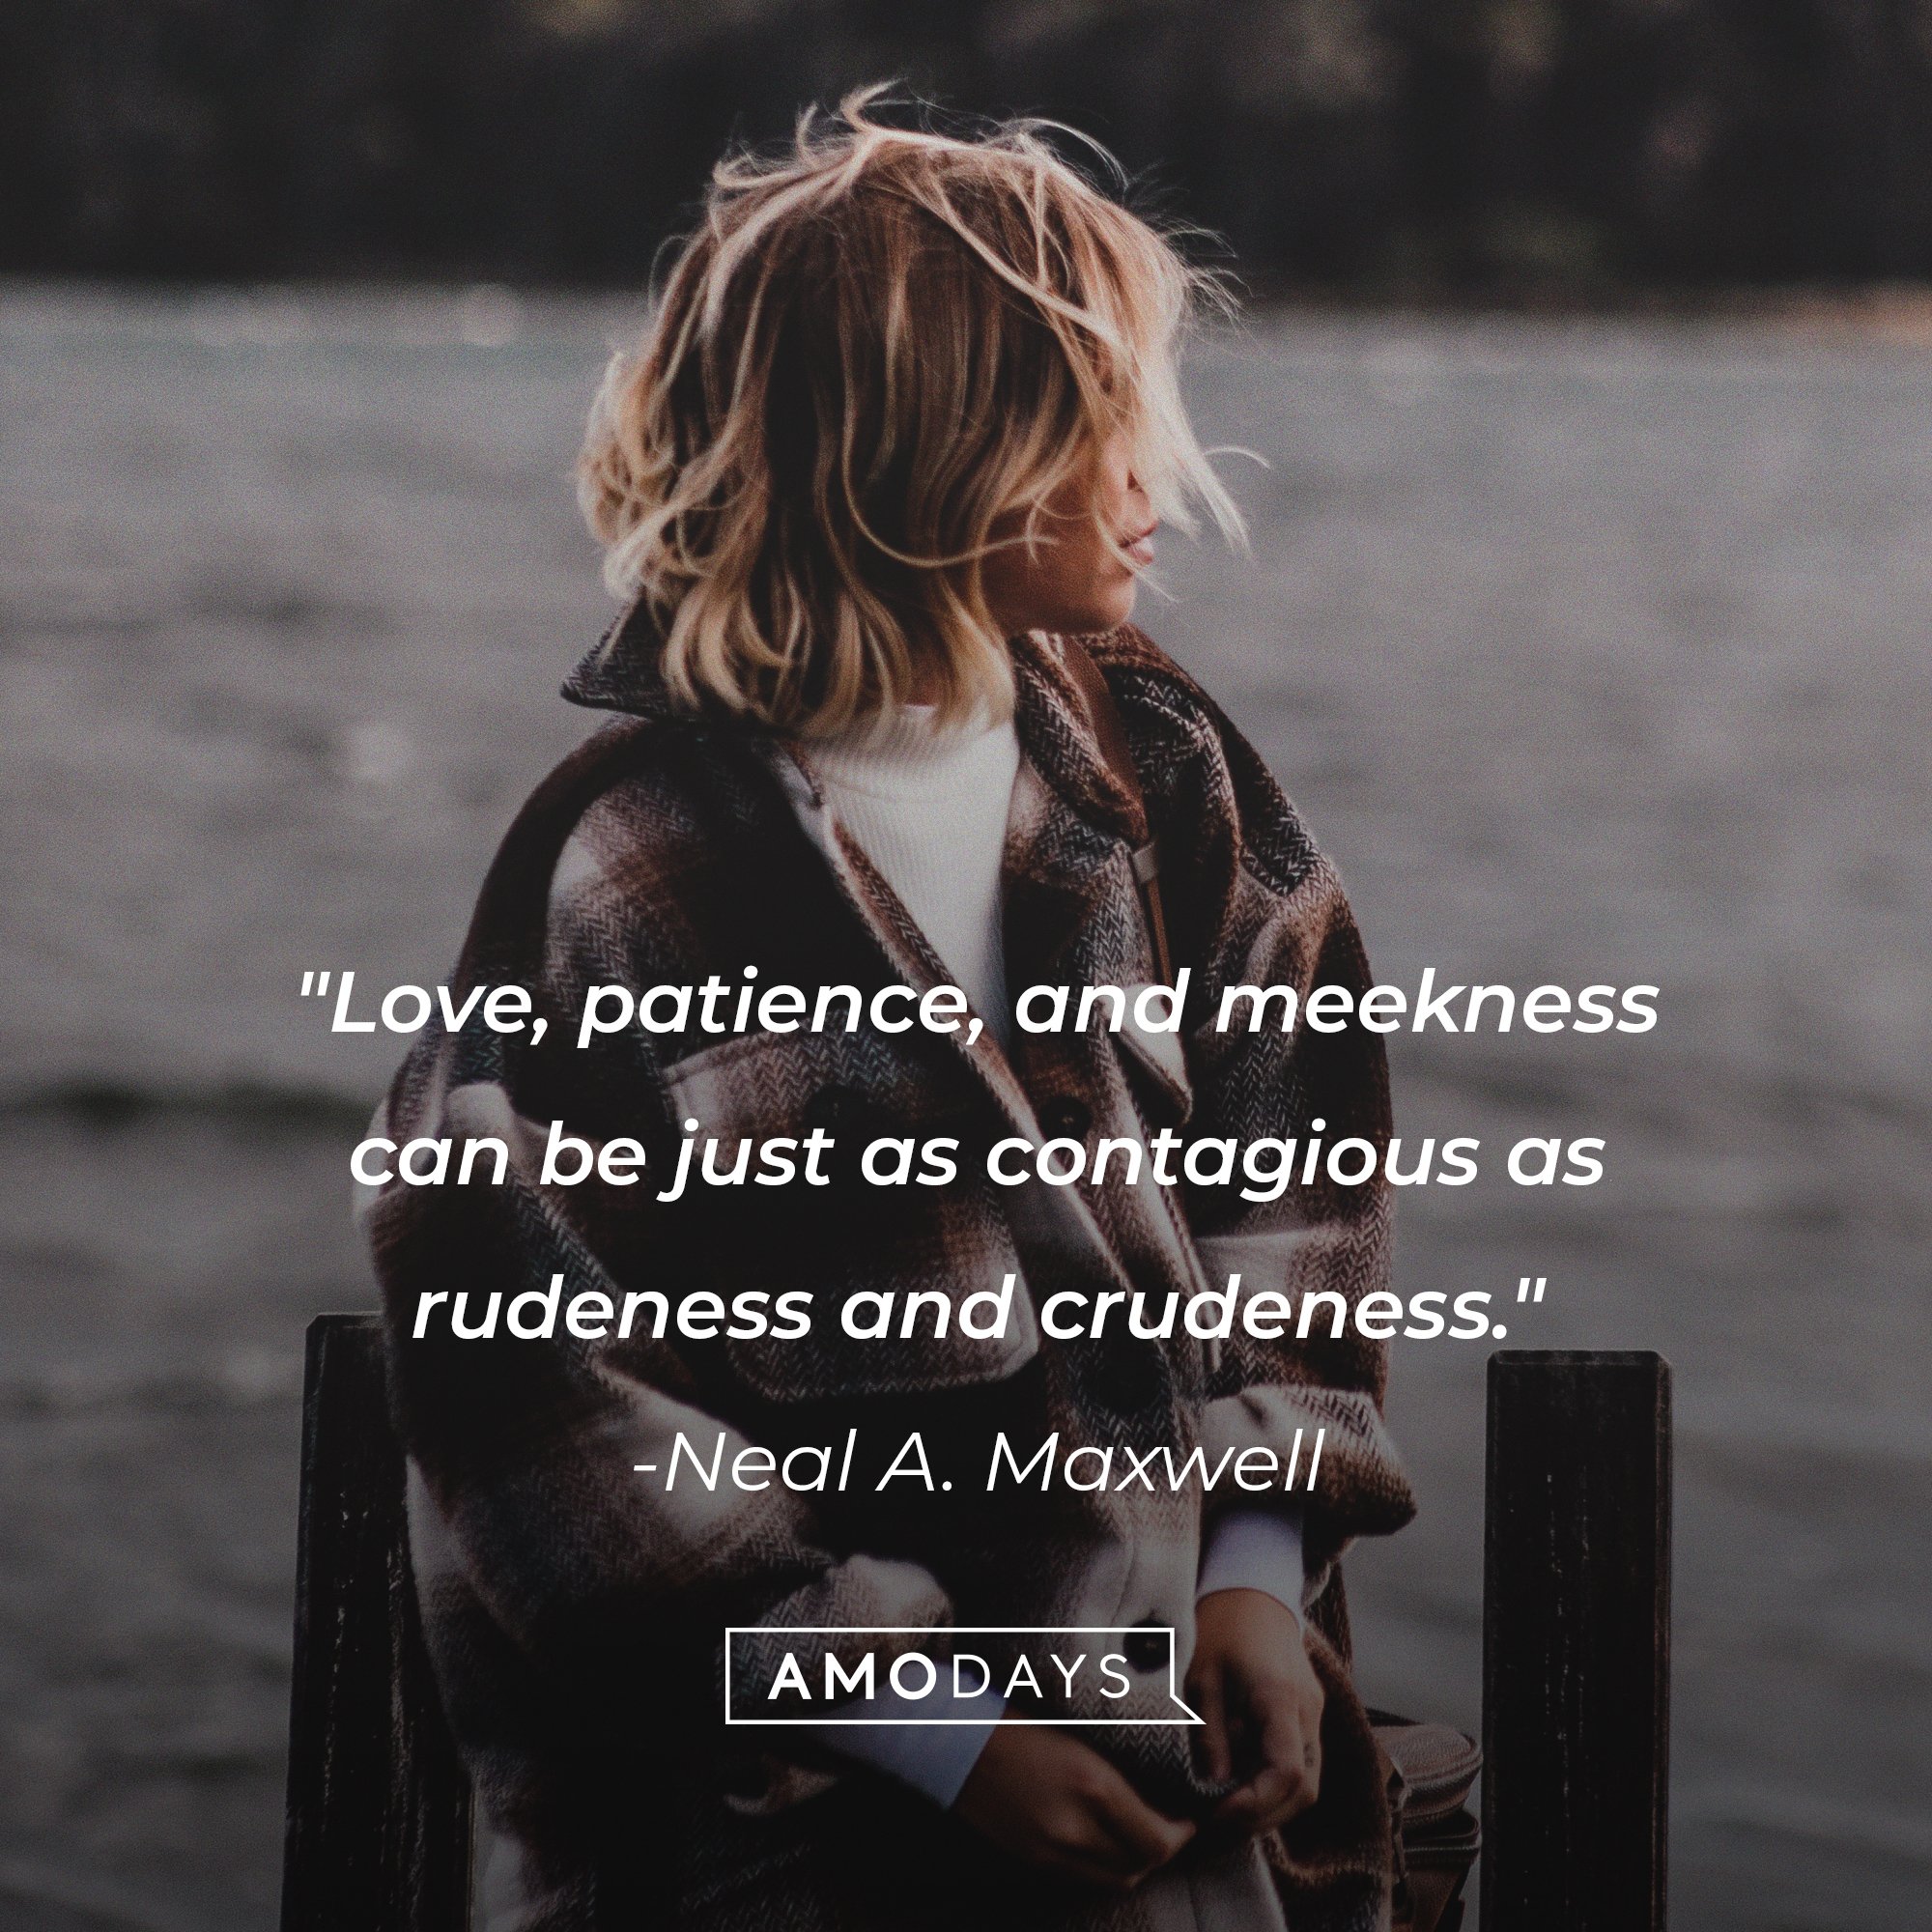  Neal A. Maxwell’s quote: "Love, patience, and meekness can be just as contagious as rudeness and crudeness." | Image: AmoDays